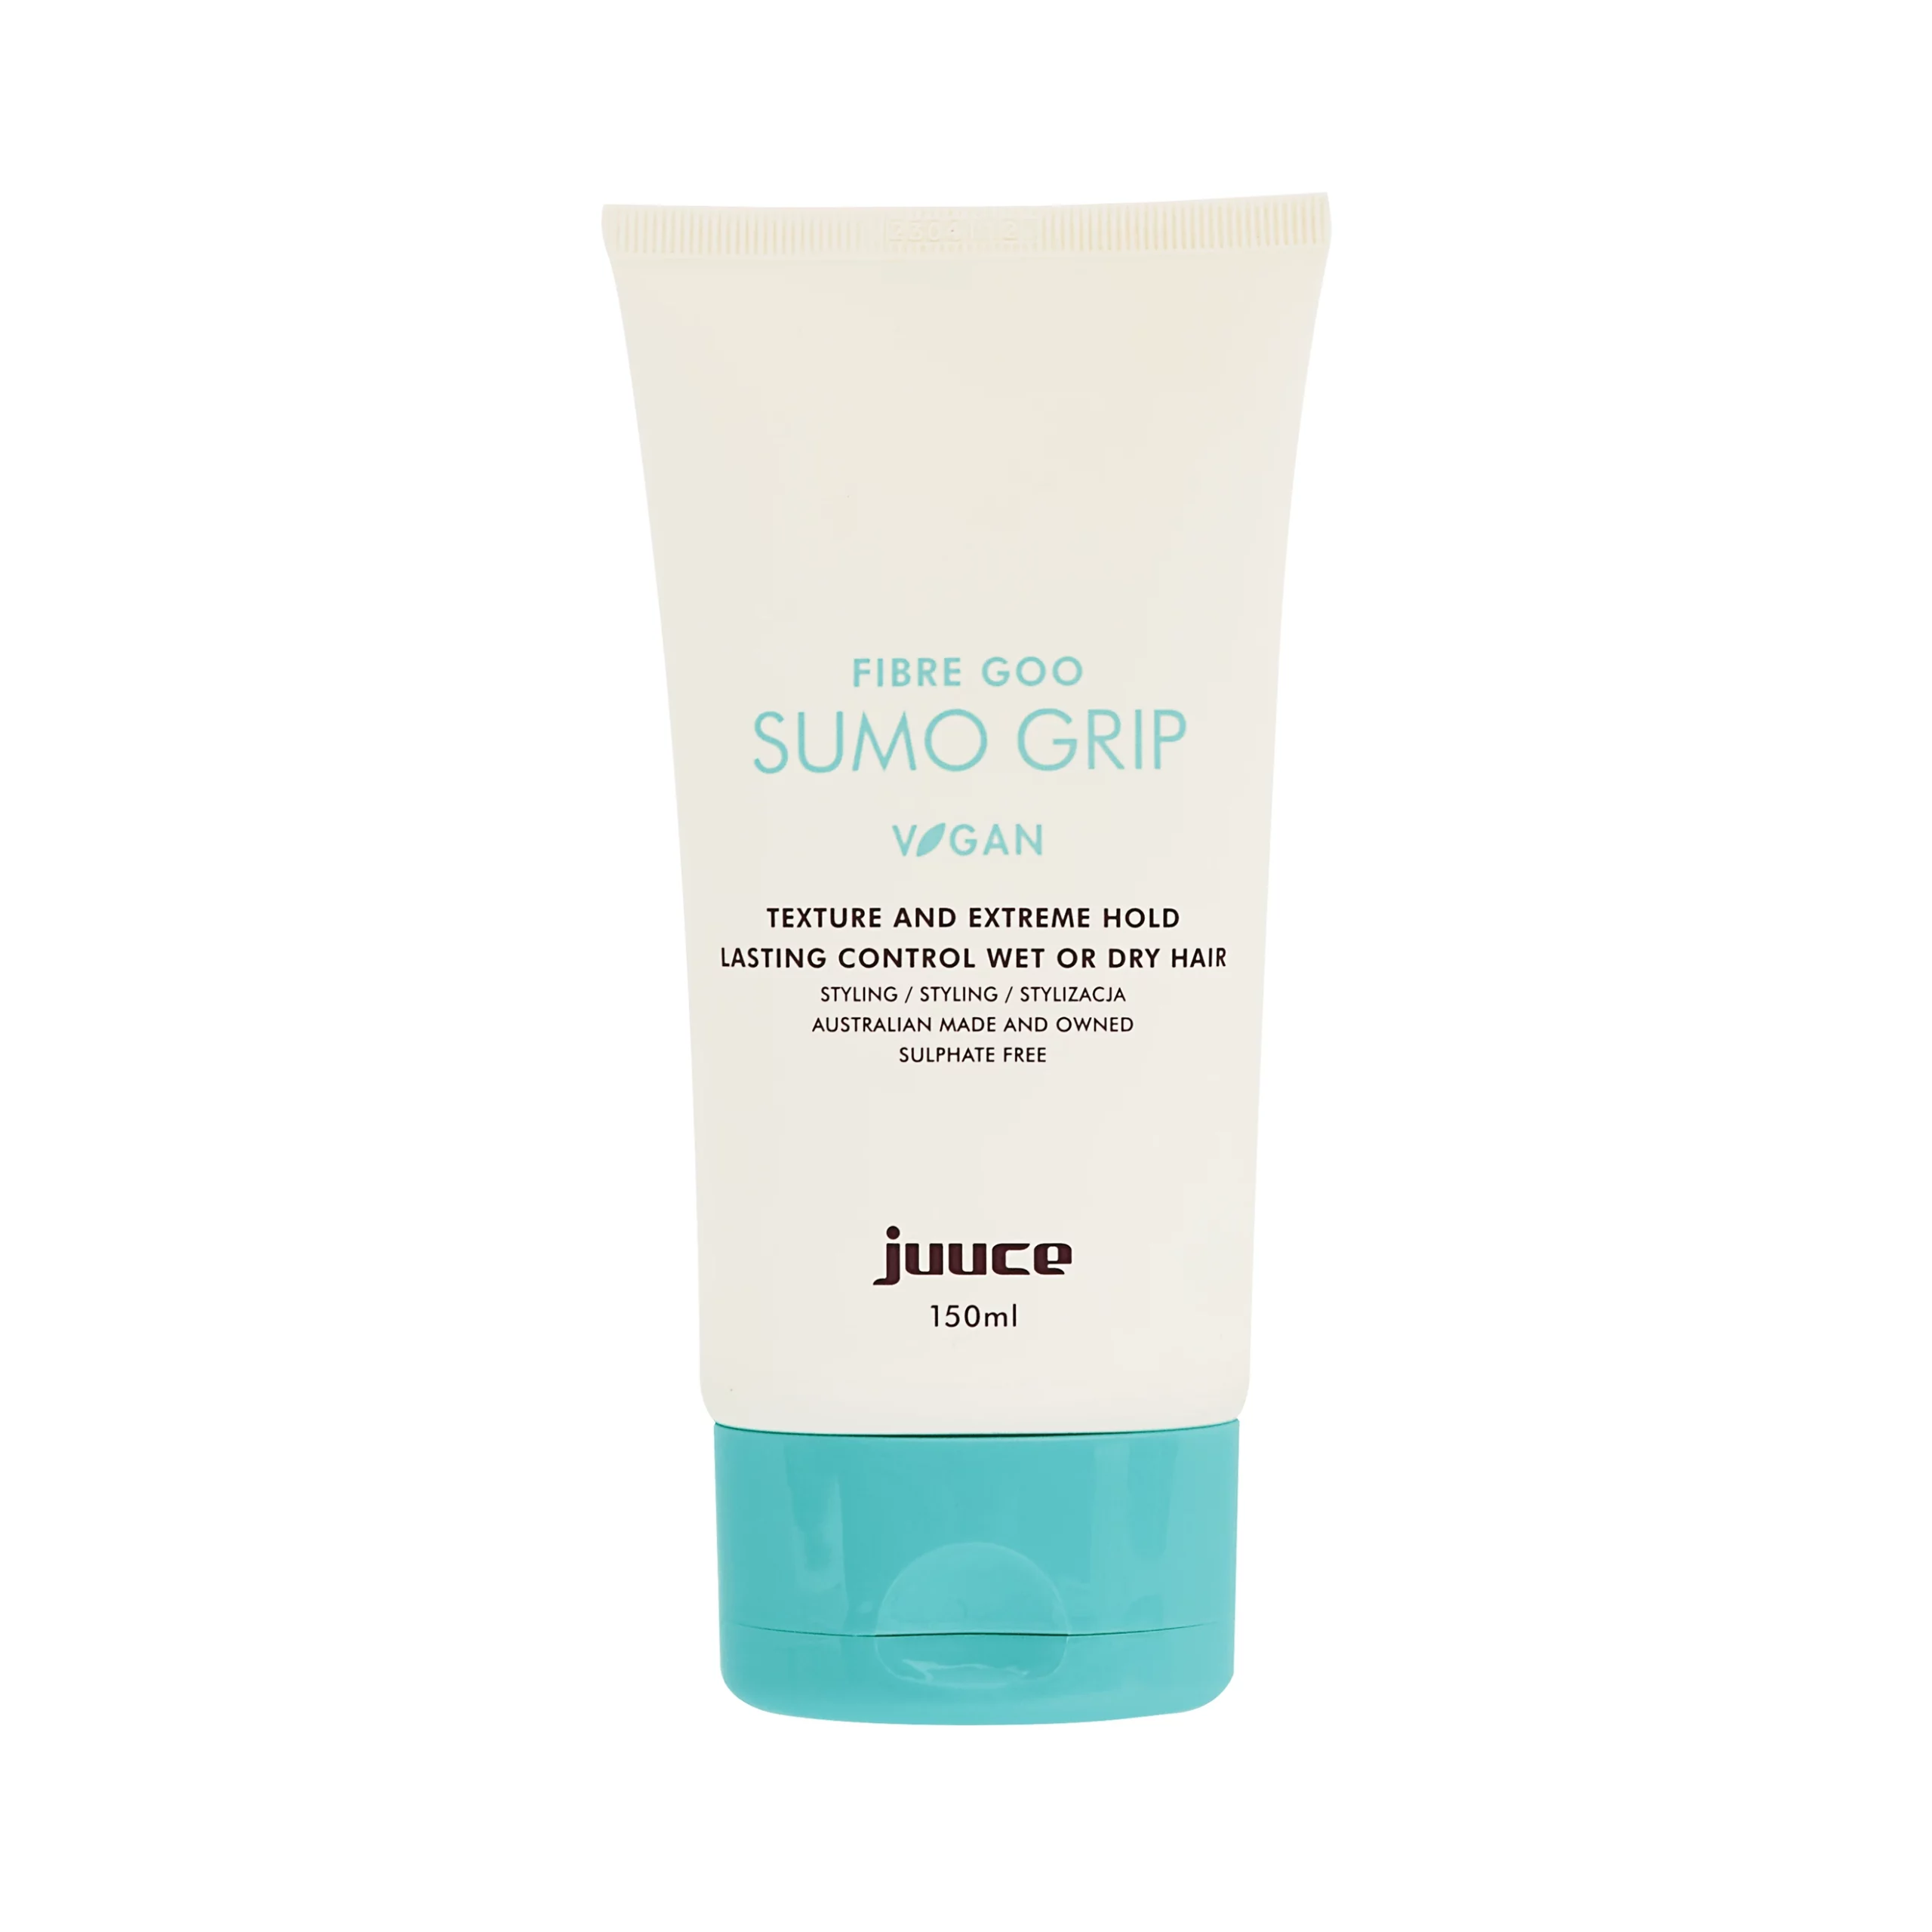 juuce-haircare-product-new-finre-goo-sumo-grip-texture-and-extreme-hold-styling-finishing-150ml-hair-pinns